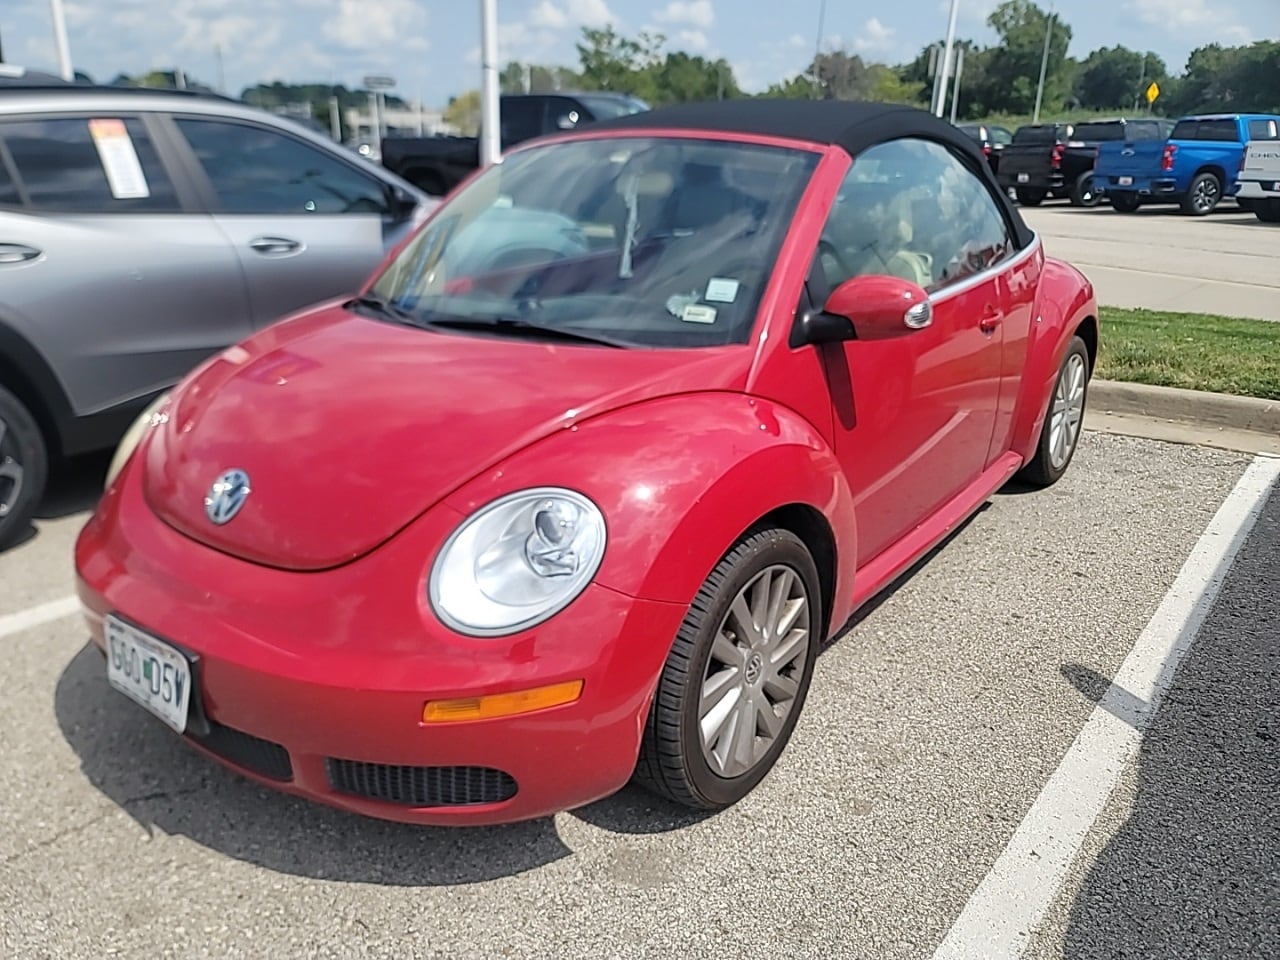 Used 2009 Volkswagen New Beetle Base with VIN 3VWRF31Y69M403385 for sale in Kansas City